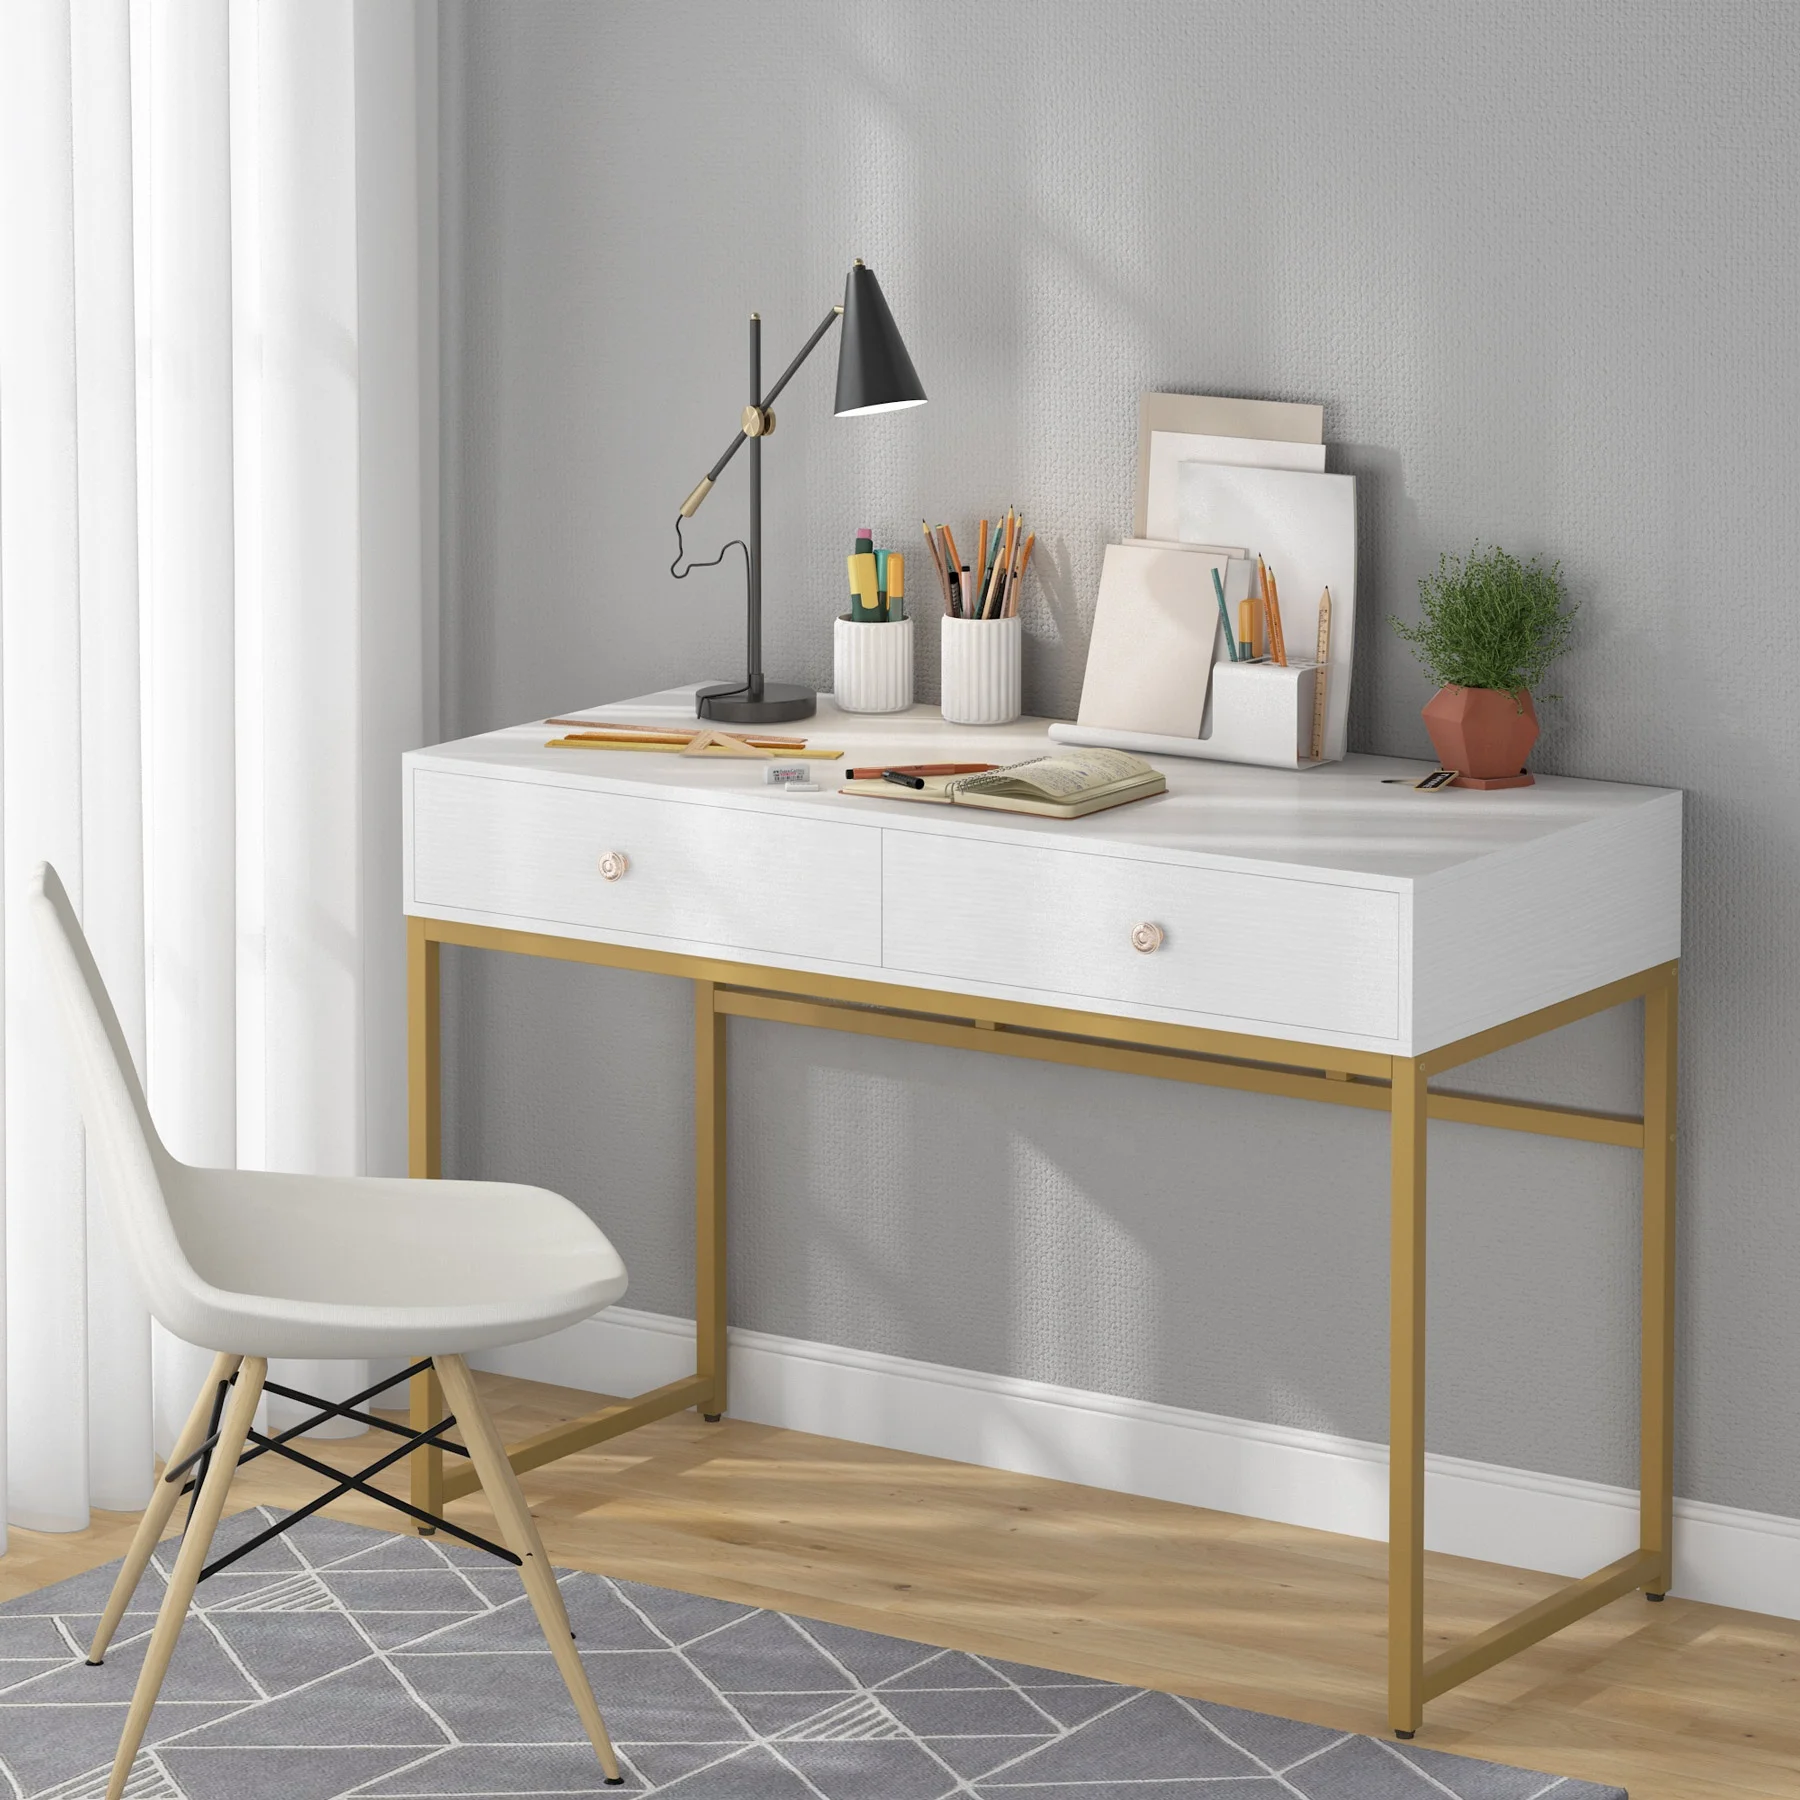 Modern Simple 47 inch Computer Desk Home Office Study Table Writing Desks Makeup Vanity Console Table with 2 Storage Drawers